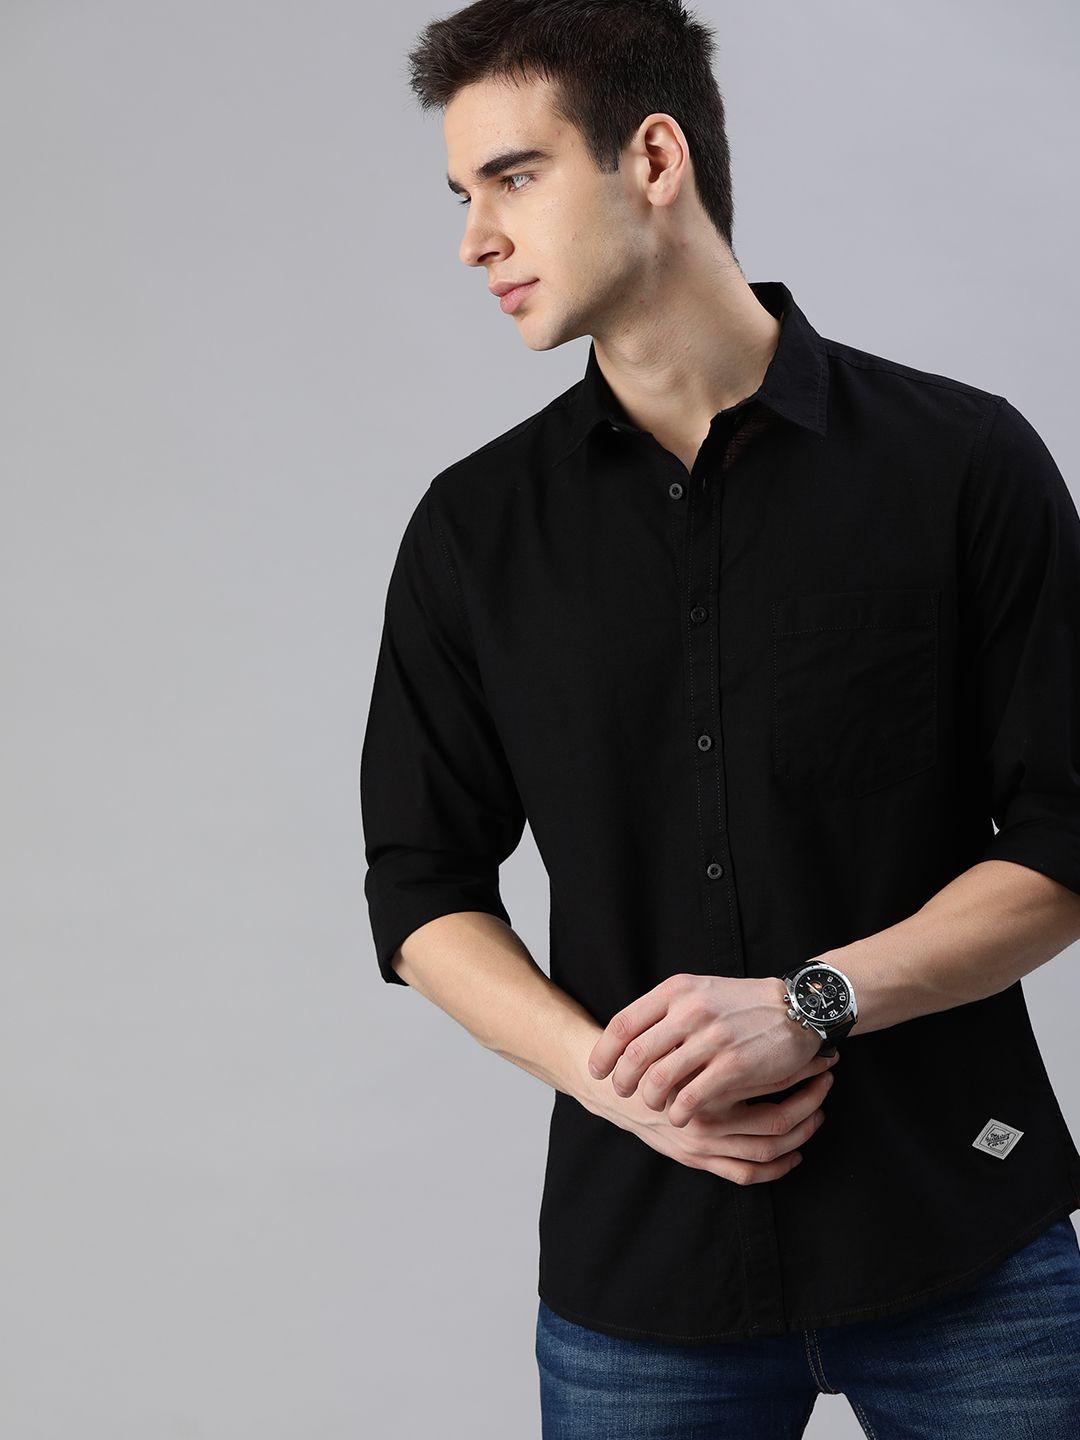 roadster-men-black-pure-cotton-sustainable-casual-shirt